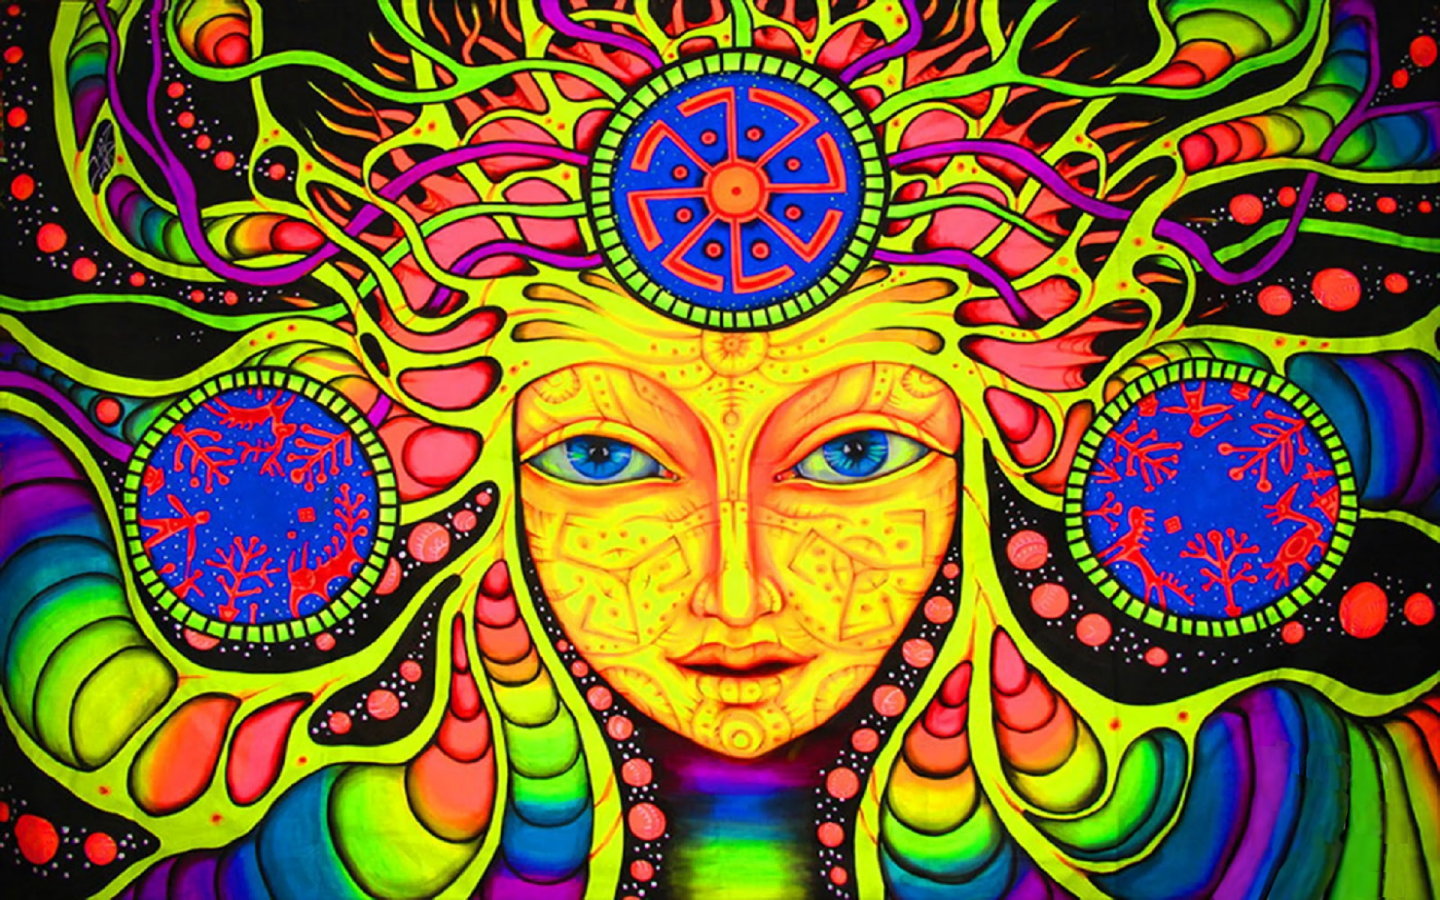 Let your creativity take a psychedelic journey